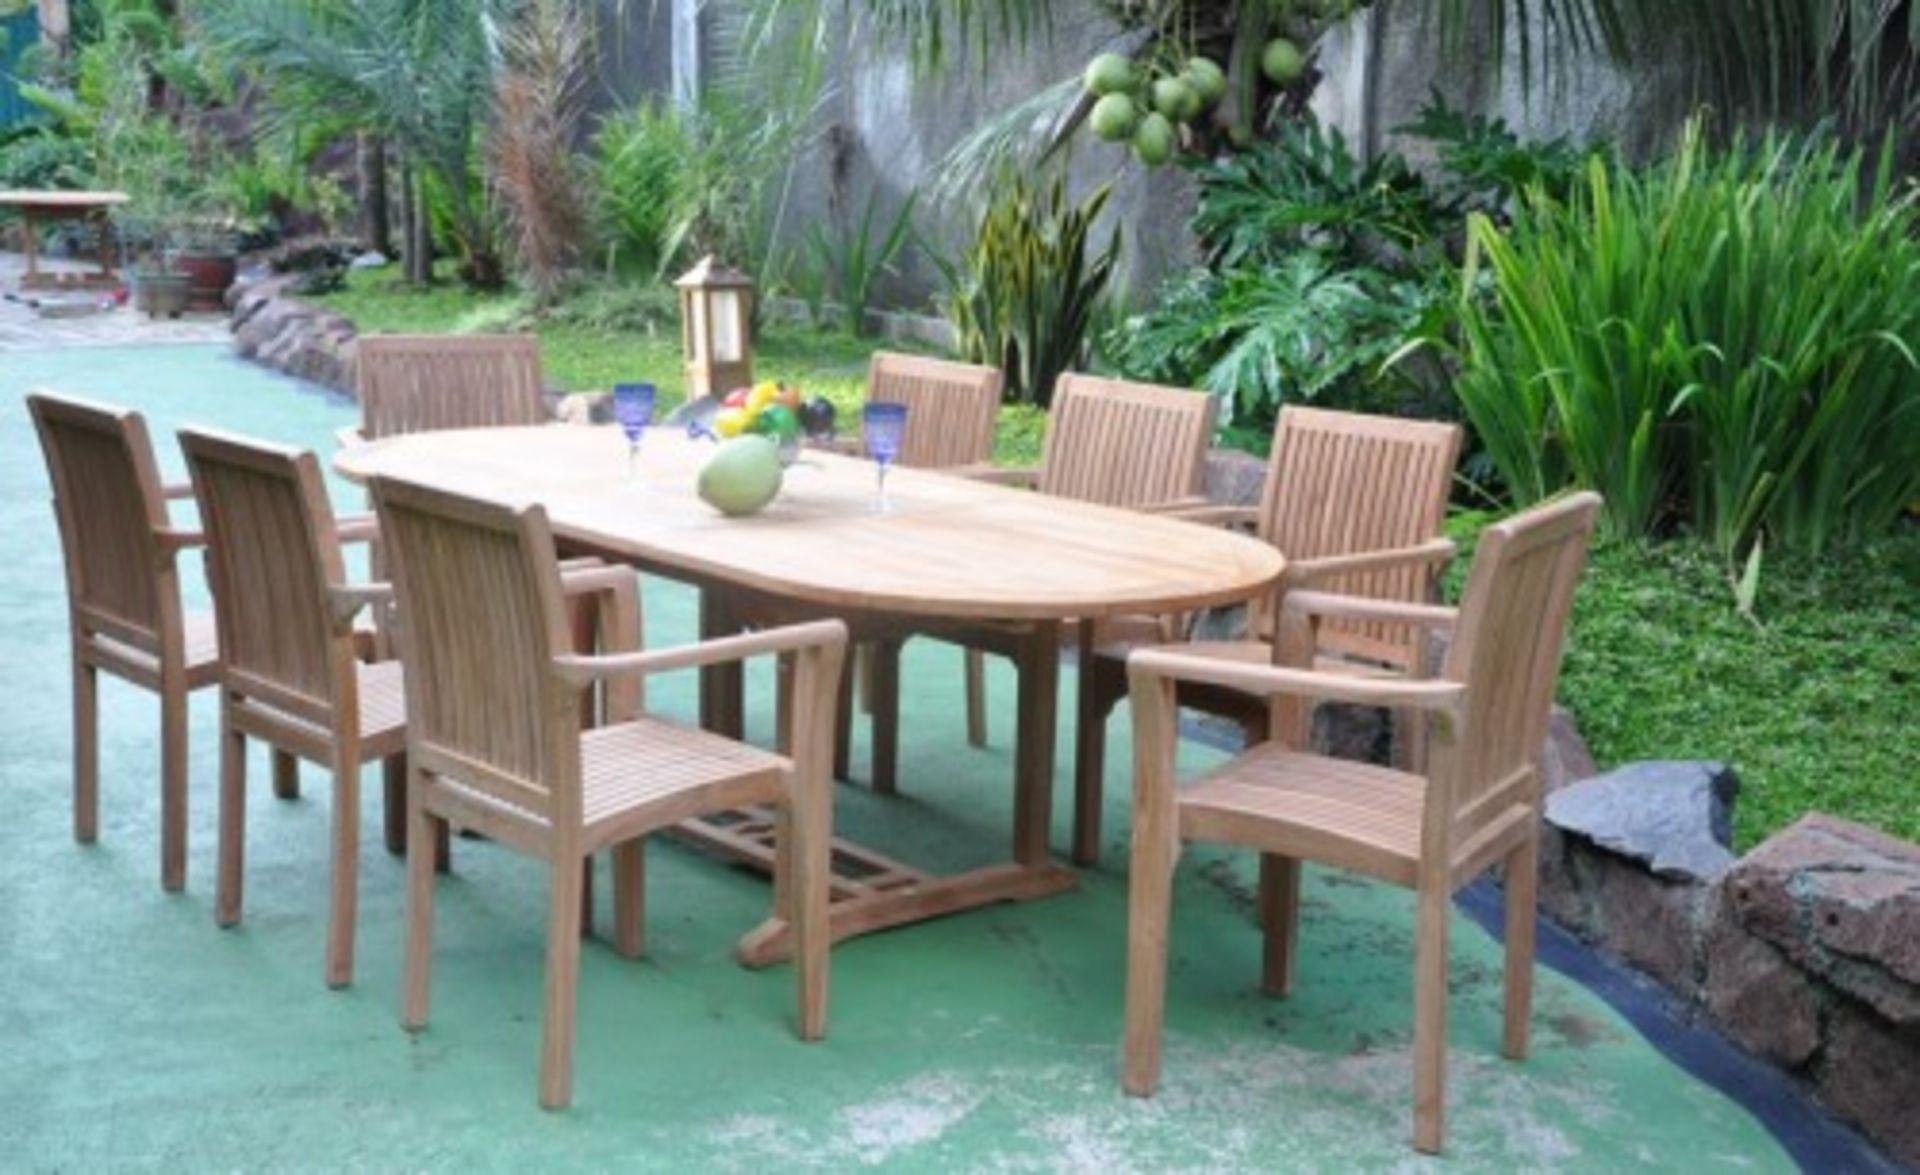 V Brand New Teak Double Extended Oval Table Set Allows For Up To 8 People including 8 stacking